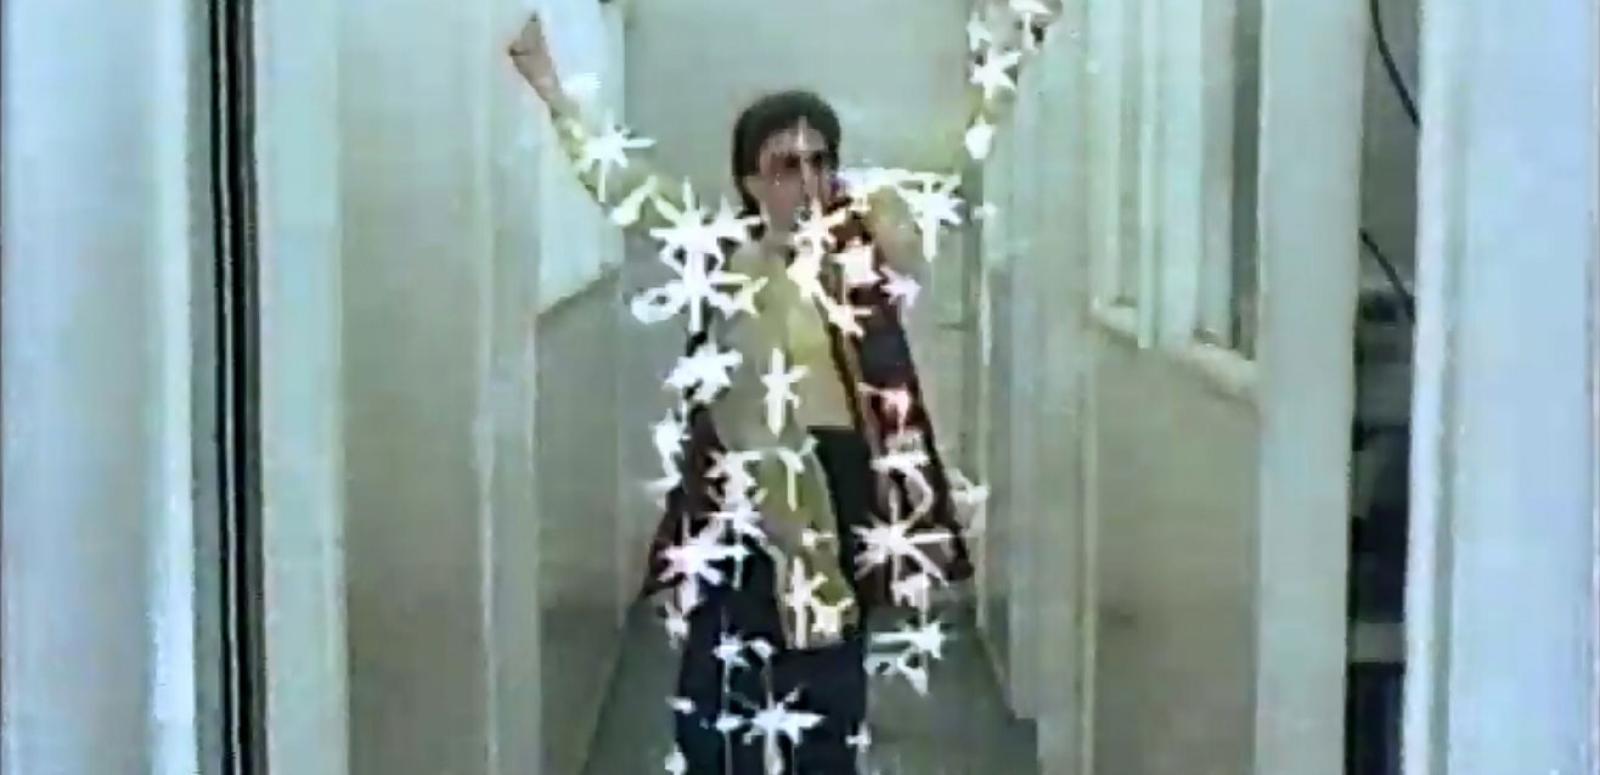 Frame capture of a woman in a hallway with superimposed starbursts across her body